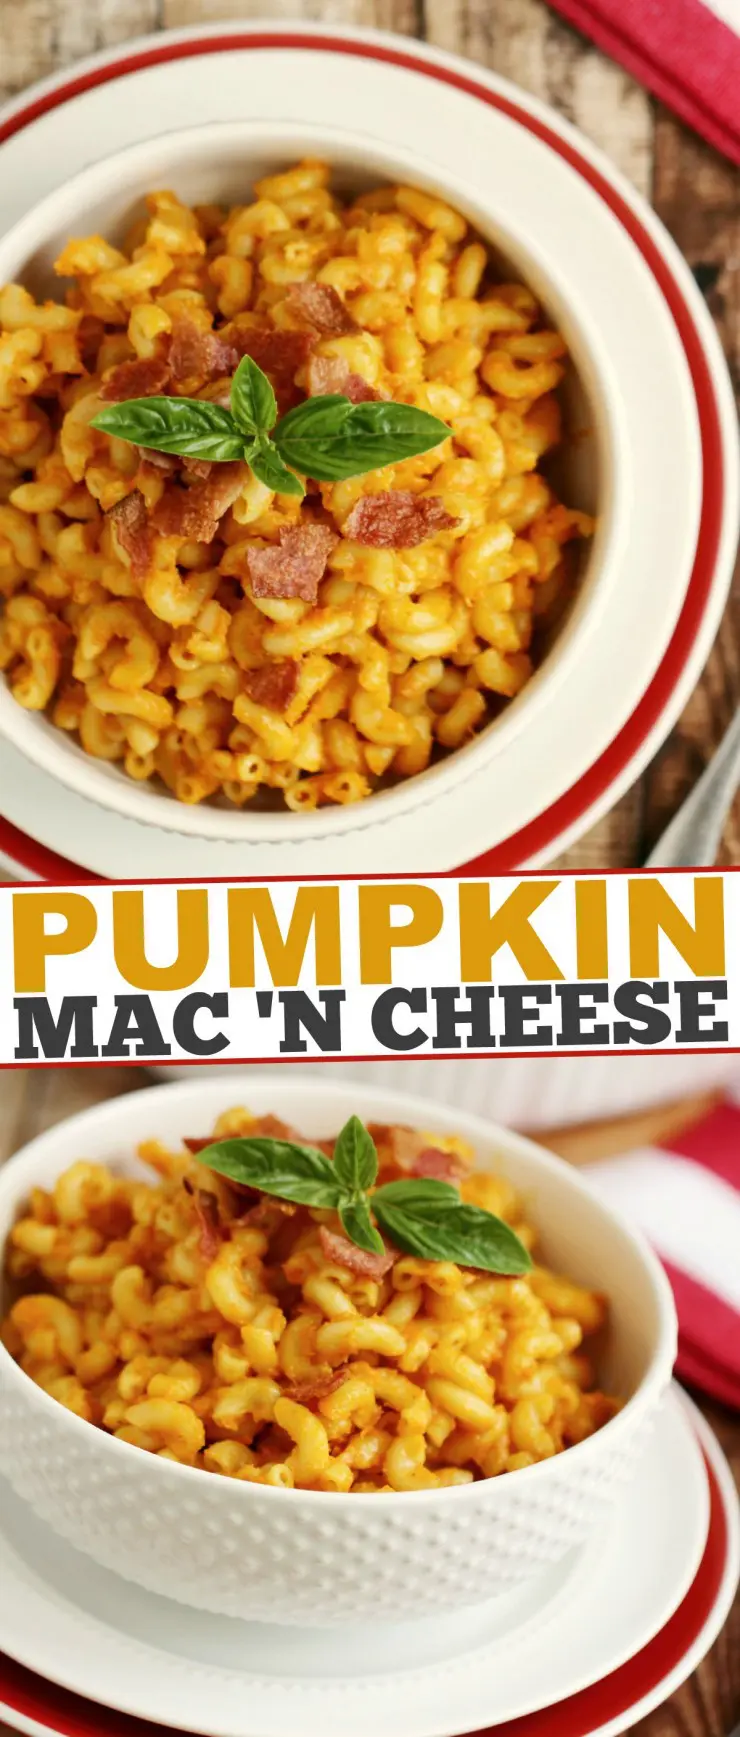 This Pumpkin Mac 'n Cheese is an autumn recipe that is sure to be your new favourite comfort food.